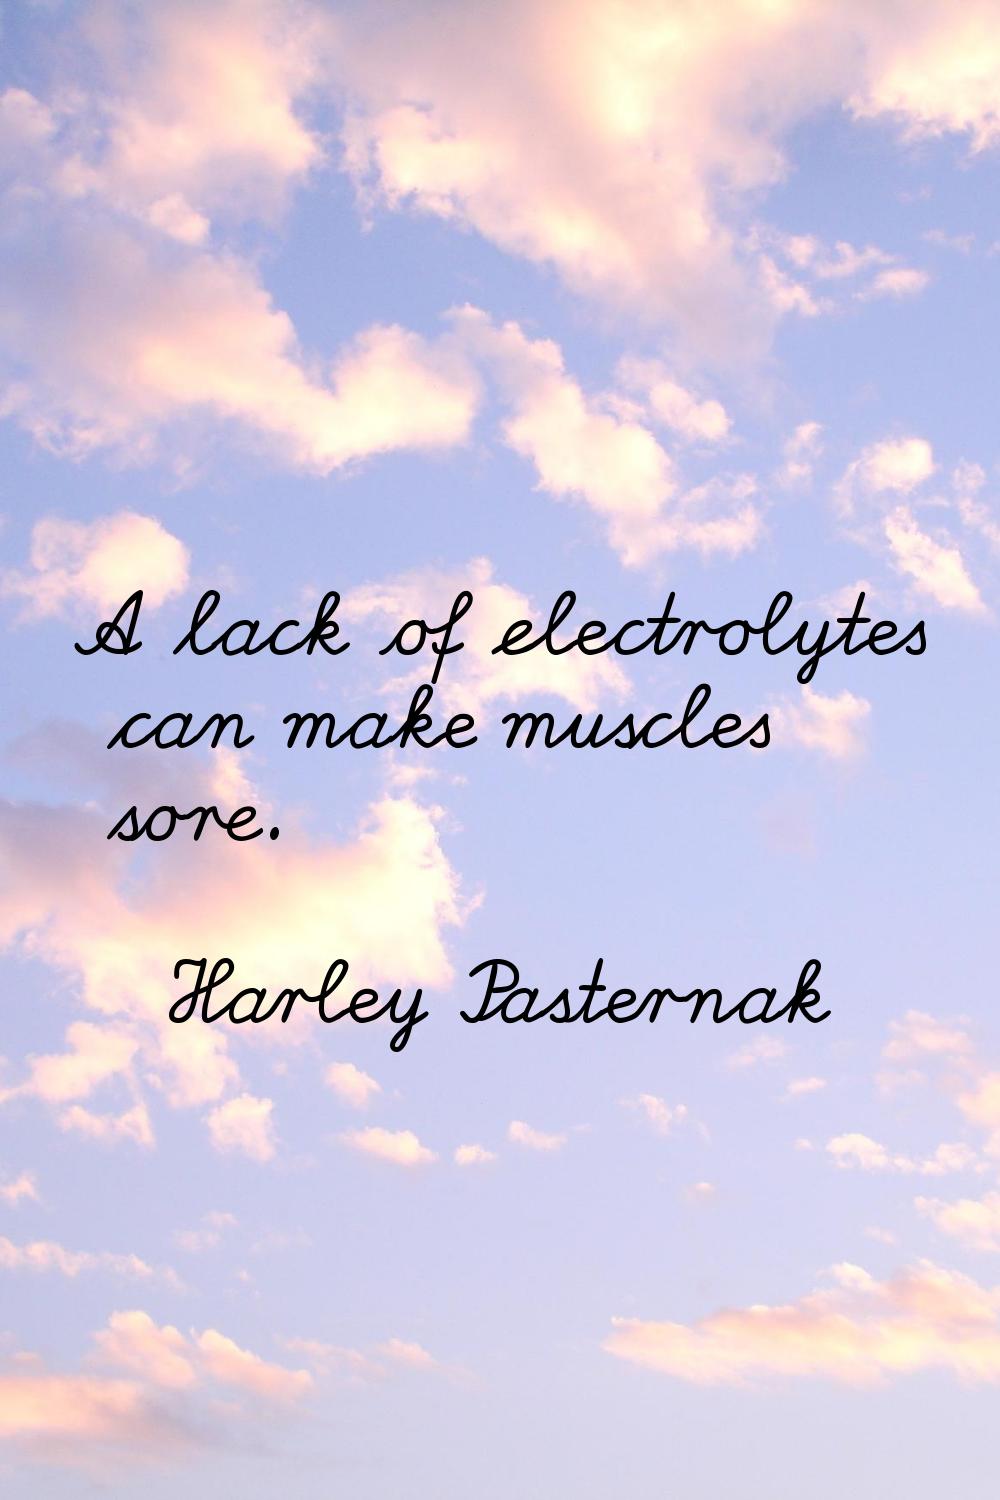 A lack of electrolytes can make muscles sore.